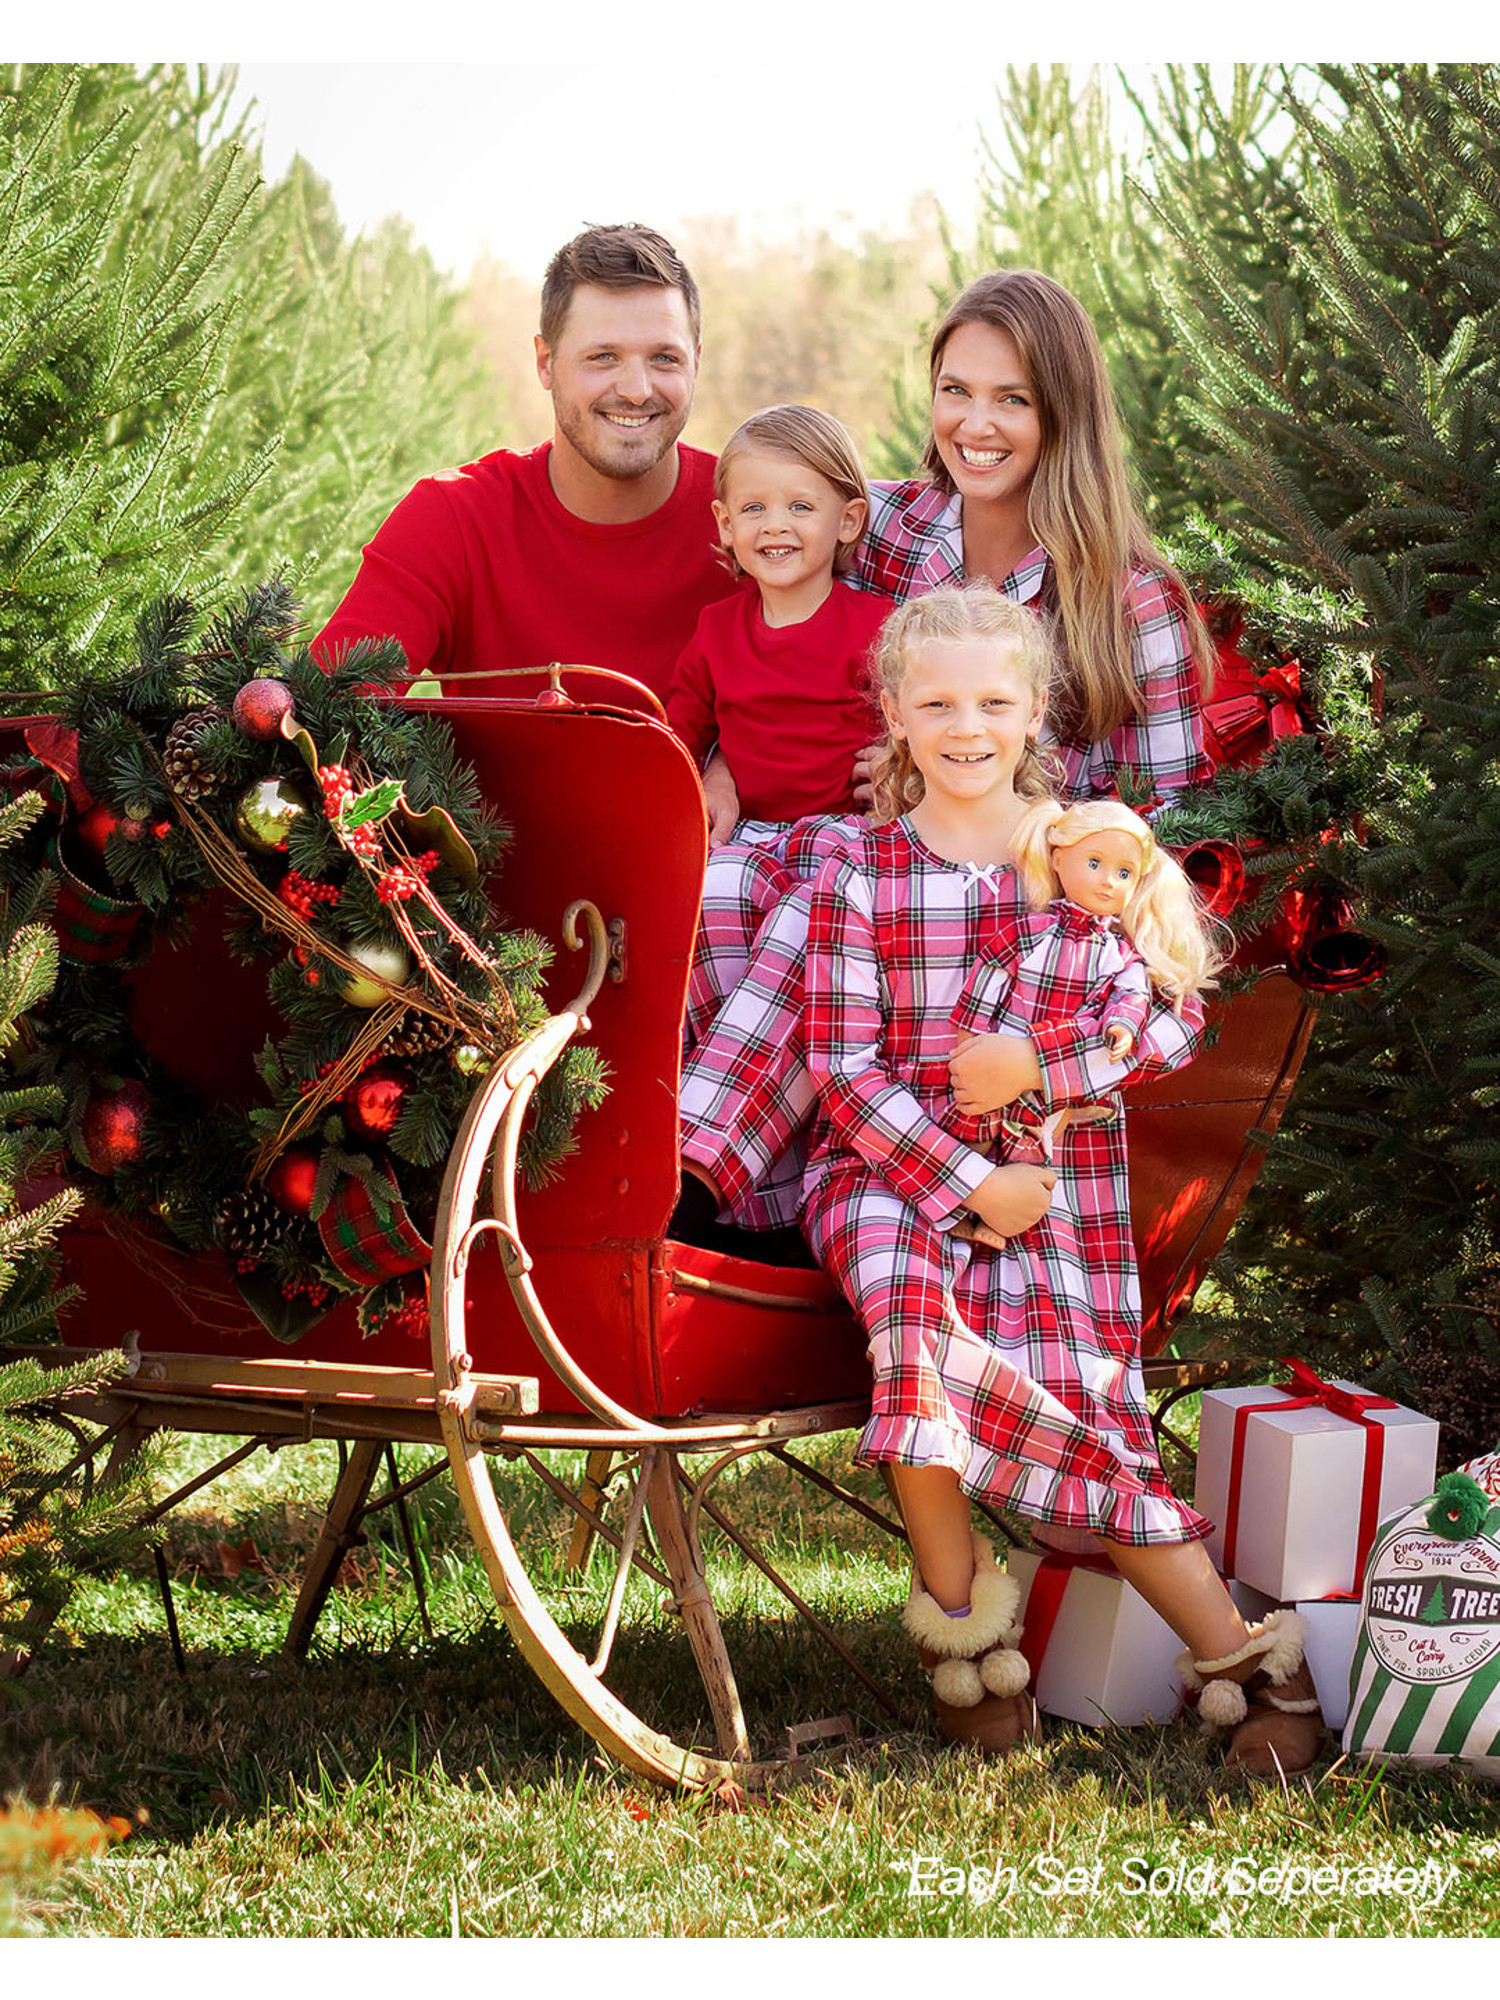 SleepytimePJs Matching Family Christmas Pajama Sets, Red & White Plaid Flannel - image 1 of 6